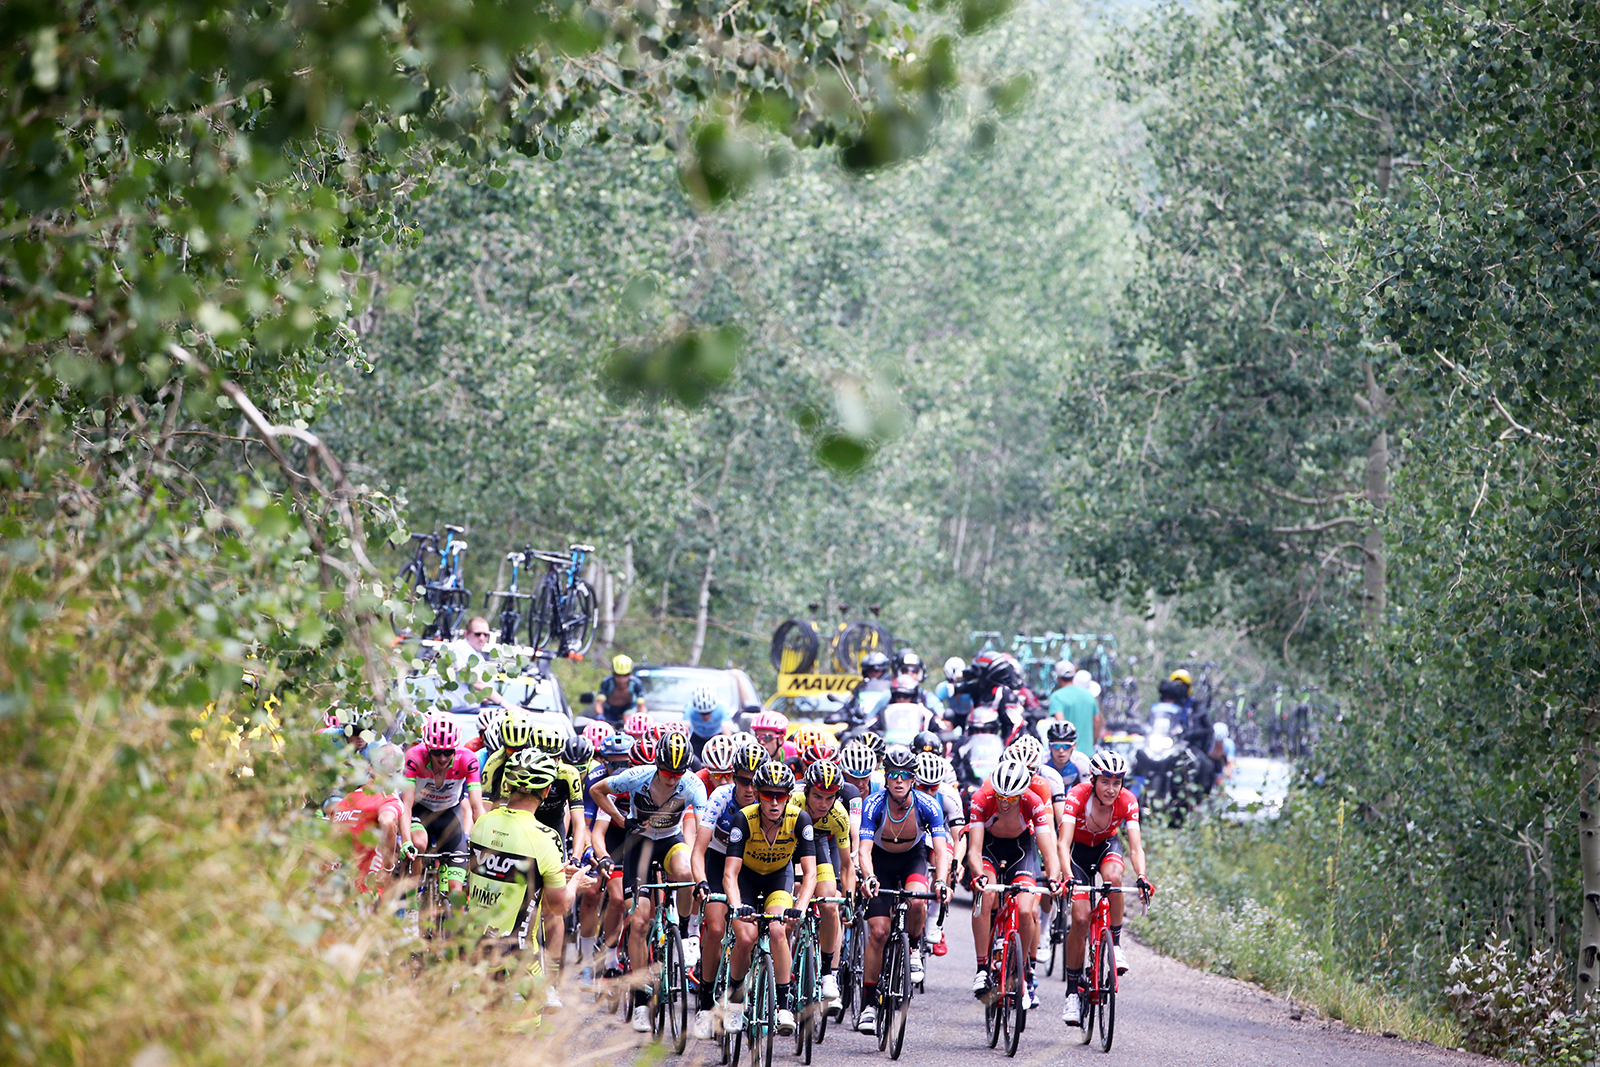 The peloton starts to close the gap.  Stage 5 of the 2018 Tour of Utah, August 10, 2018. Photo by Cathy Fegan-Kim, www.cottonsoxphotography.net